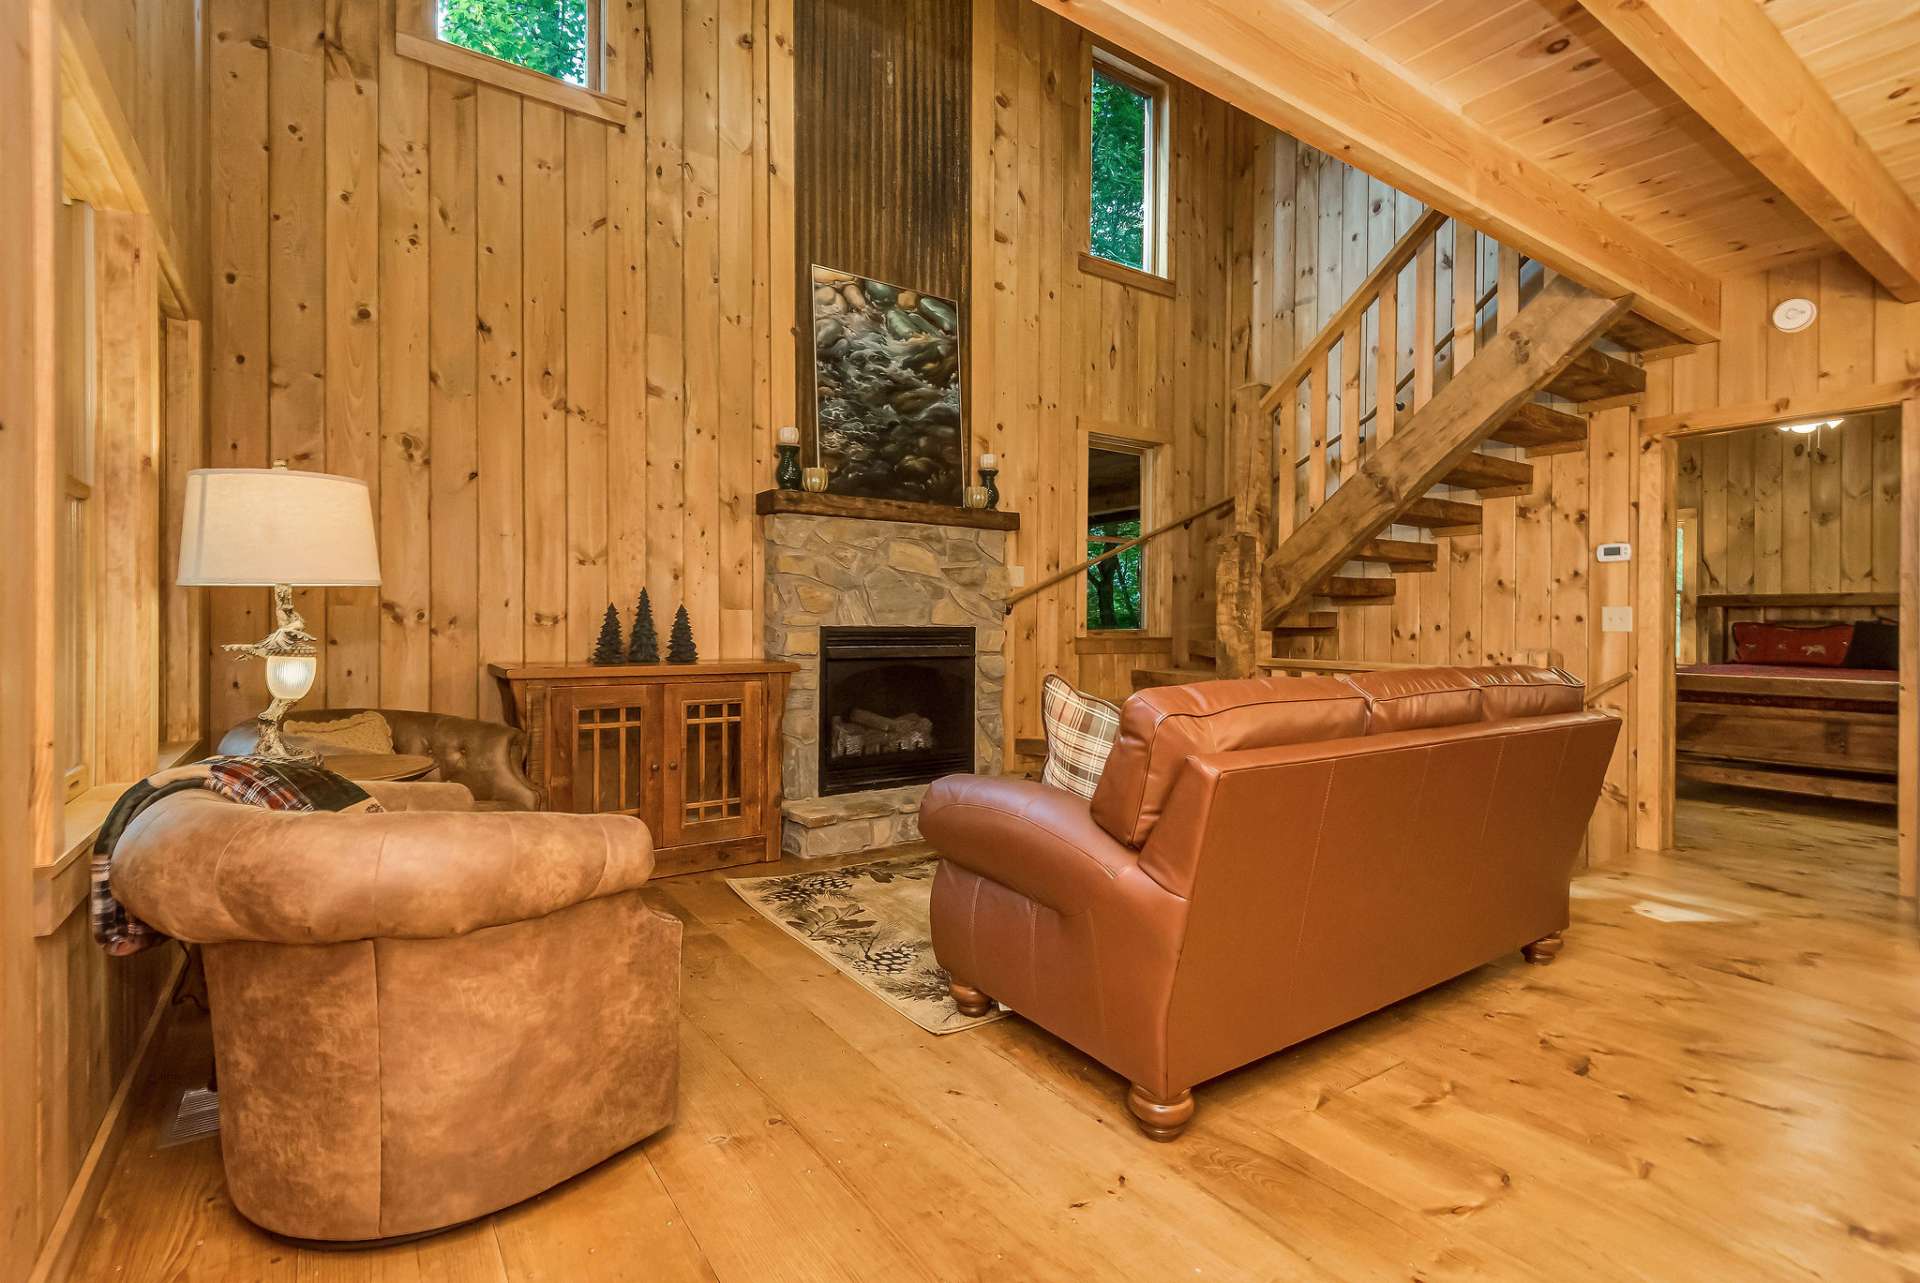 Home has been staged with new furniture and furnishings from The Cabin Store in West Jefferson, which are negotiable with the sale.